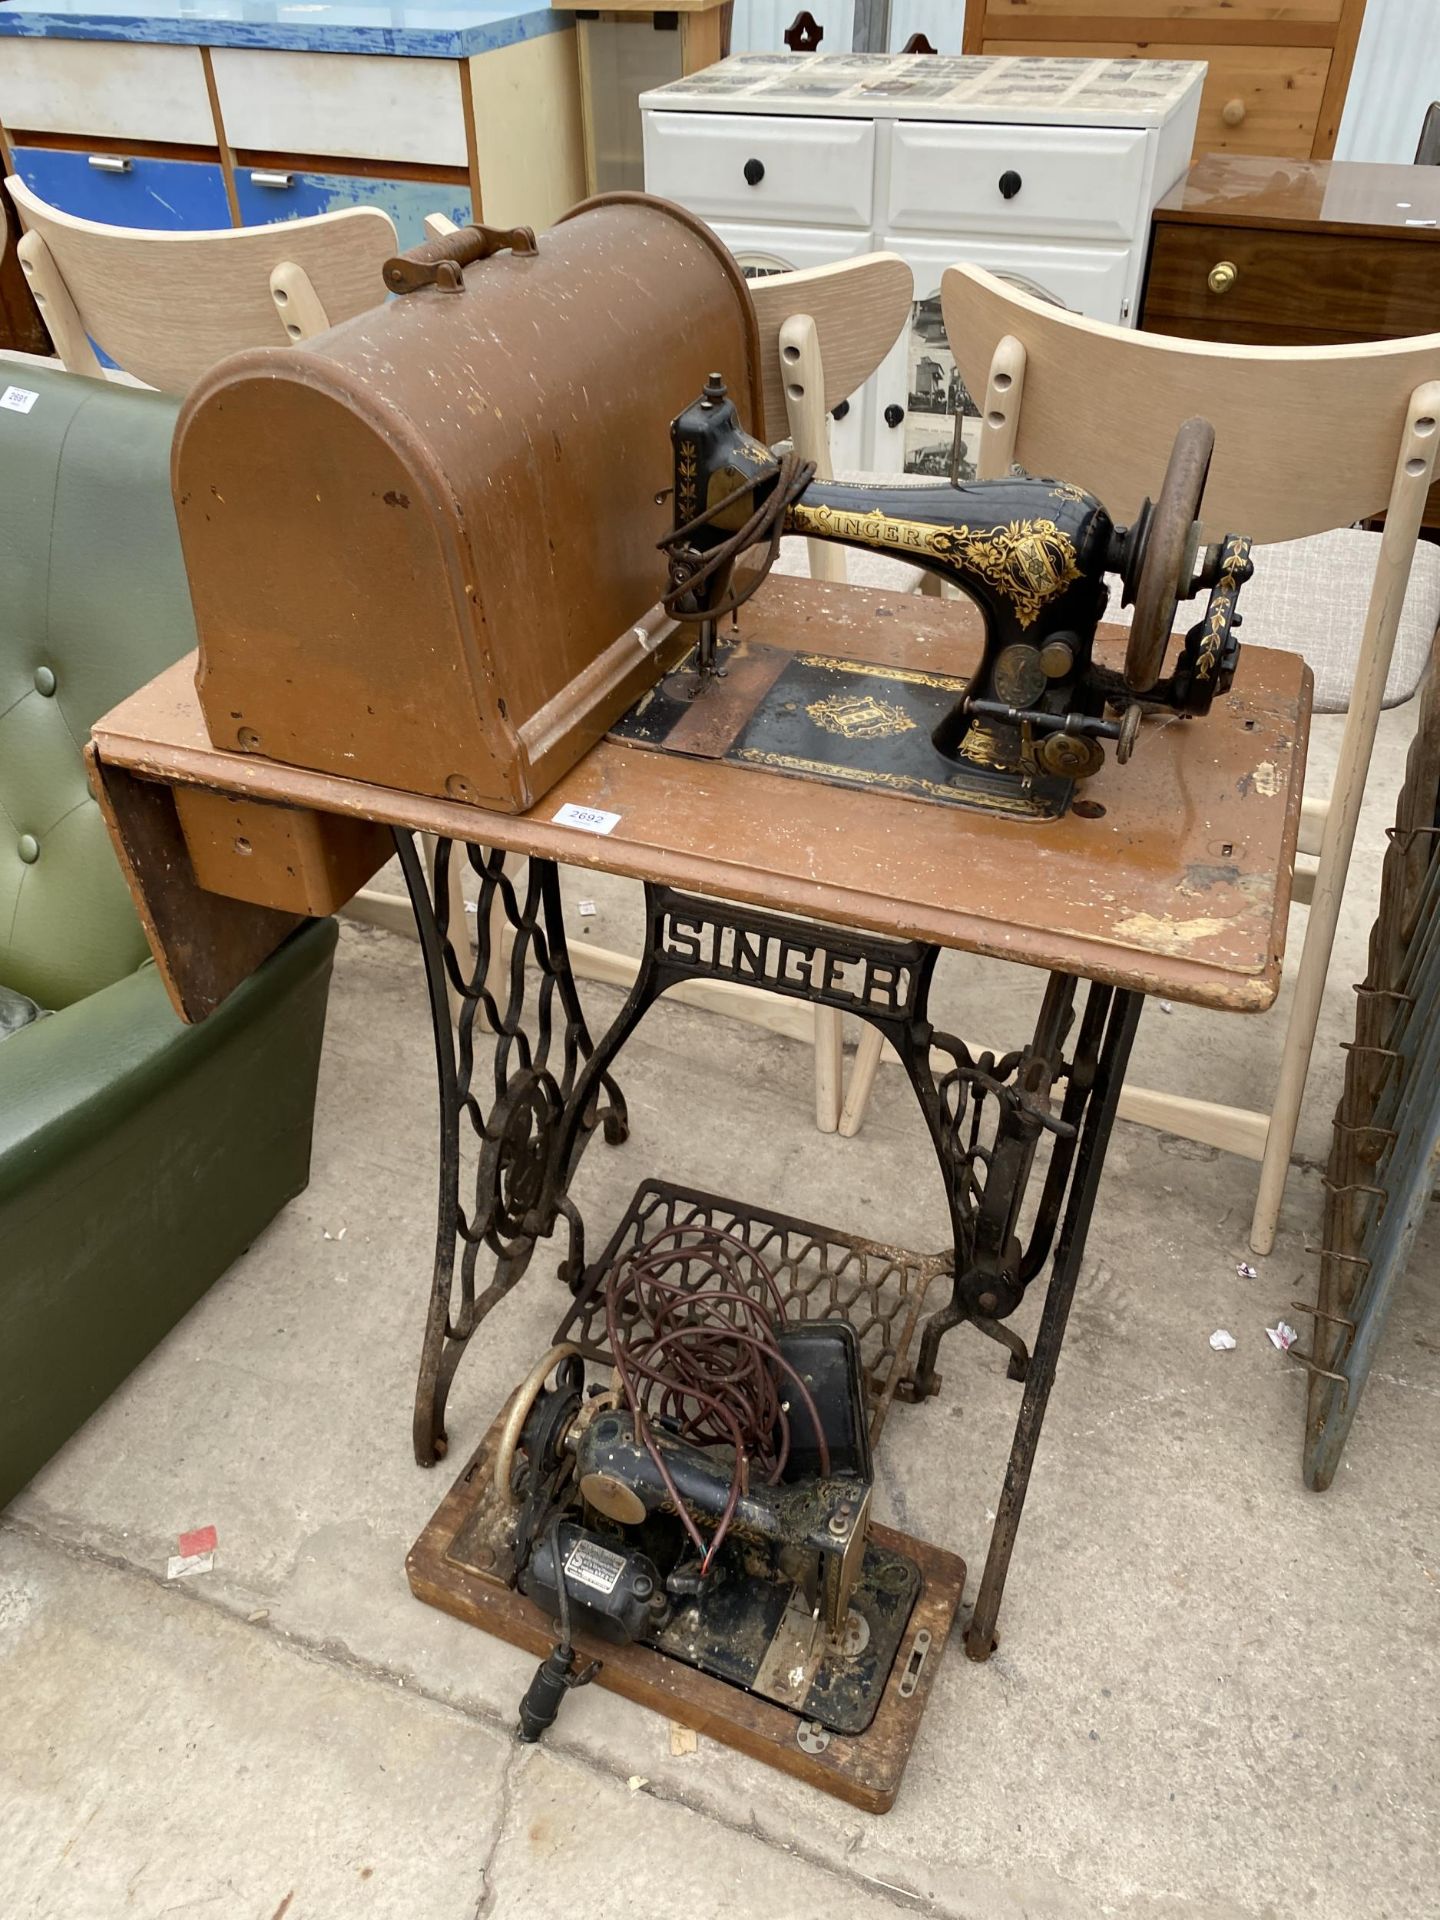 A SINGER TREADLE SEWING MACHINE, NUMBER R604055 AND MUNDLOS (77) SEWING MACHINE WITH SIMANCO